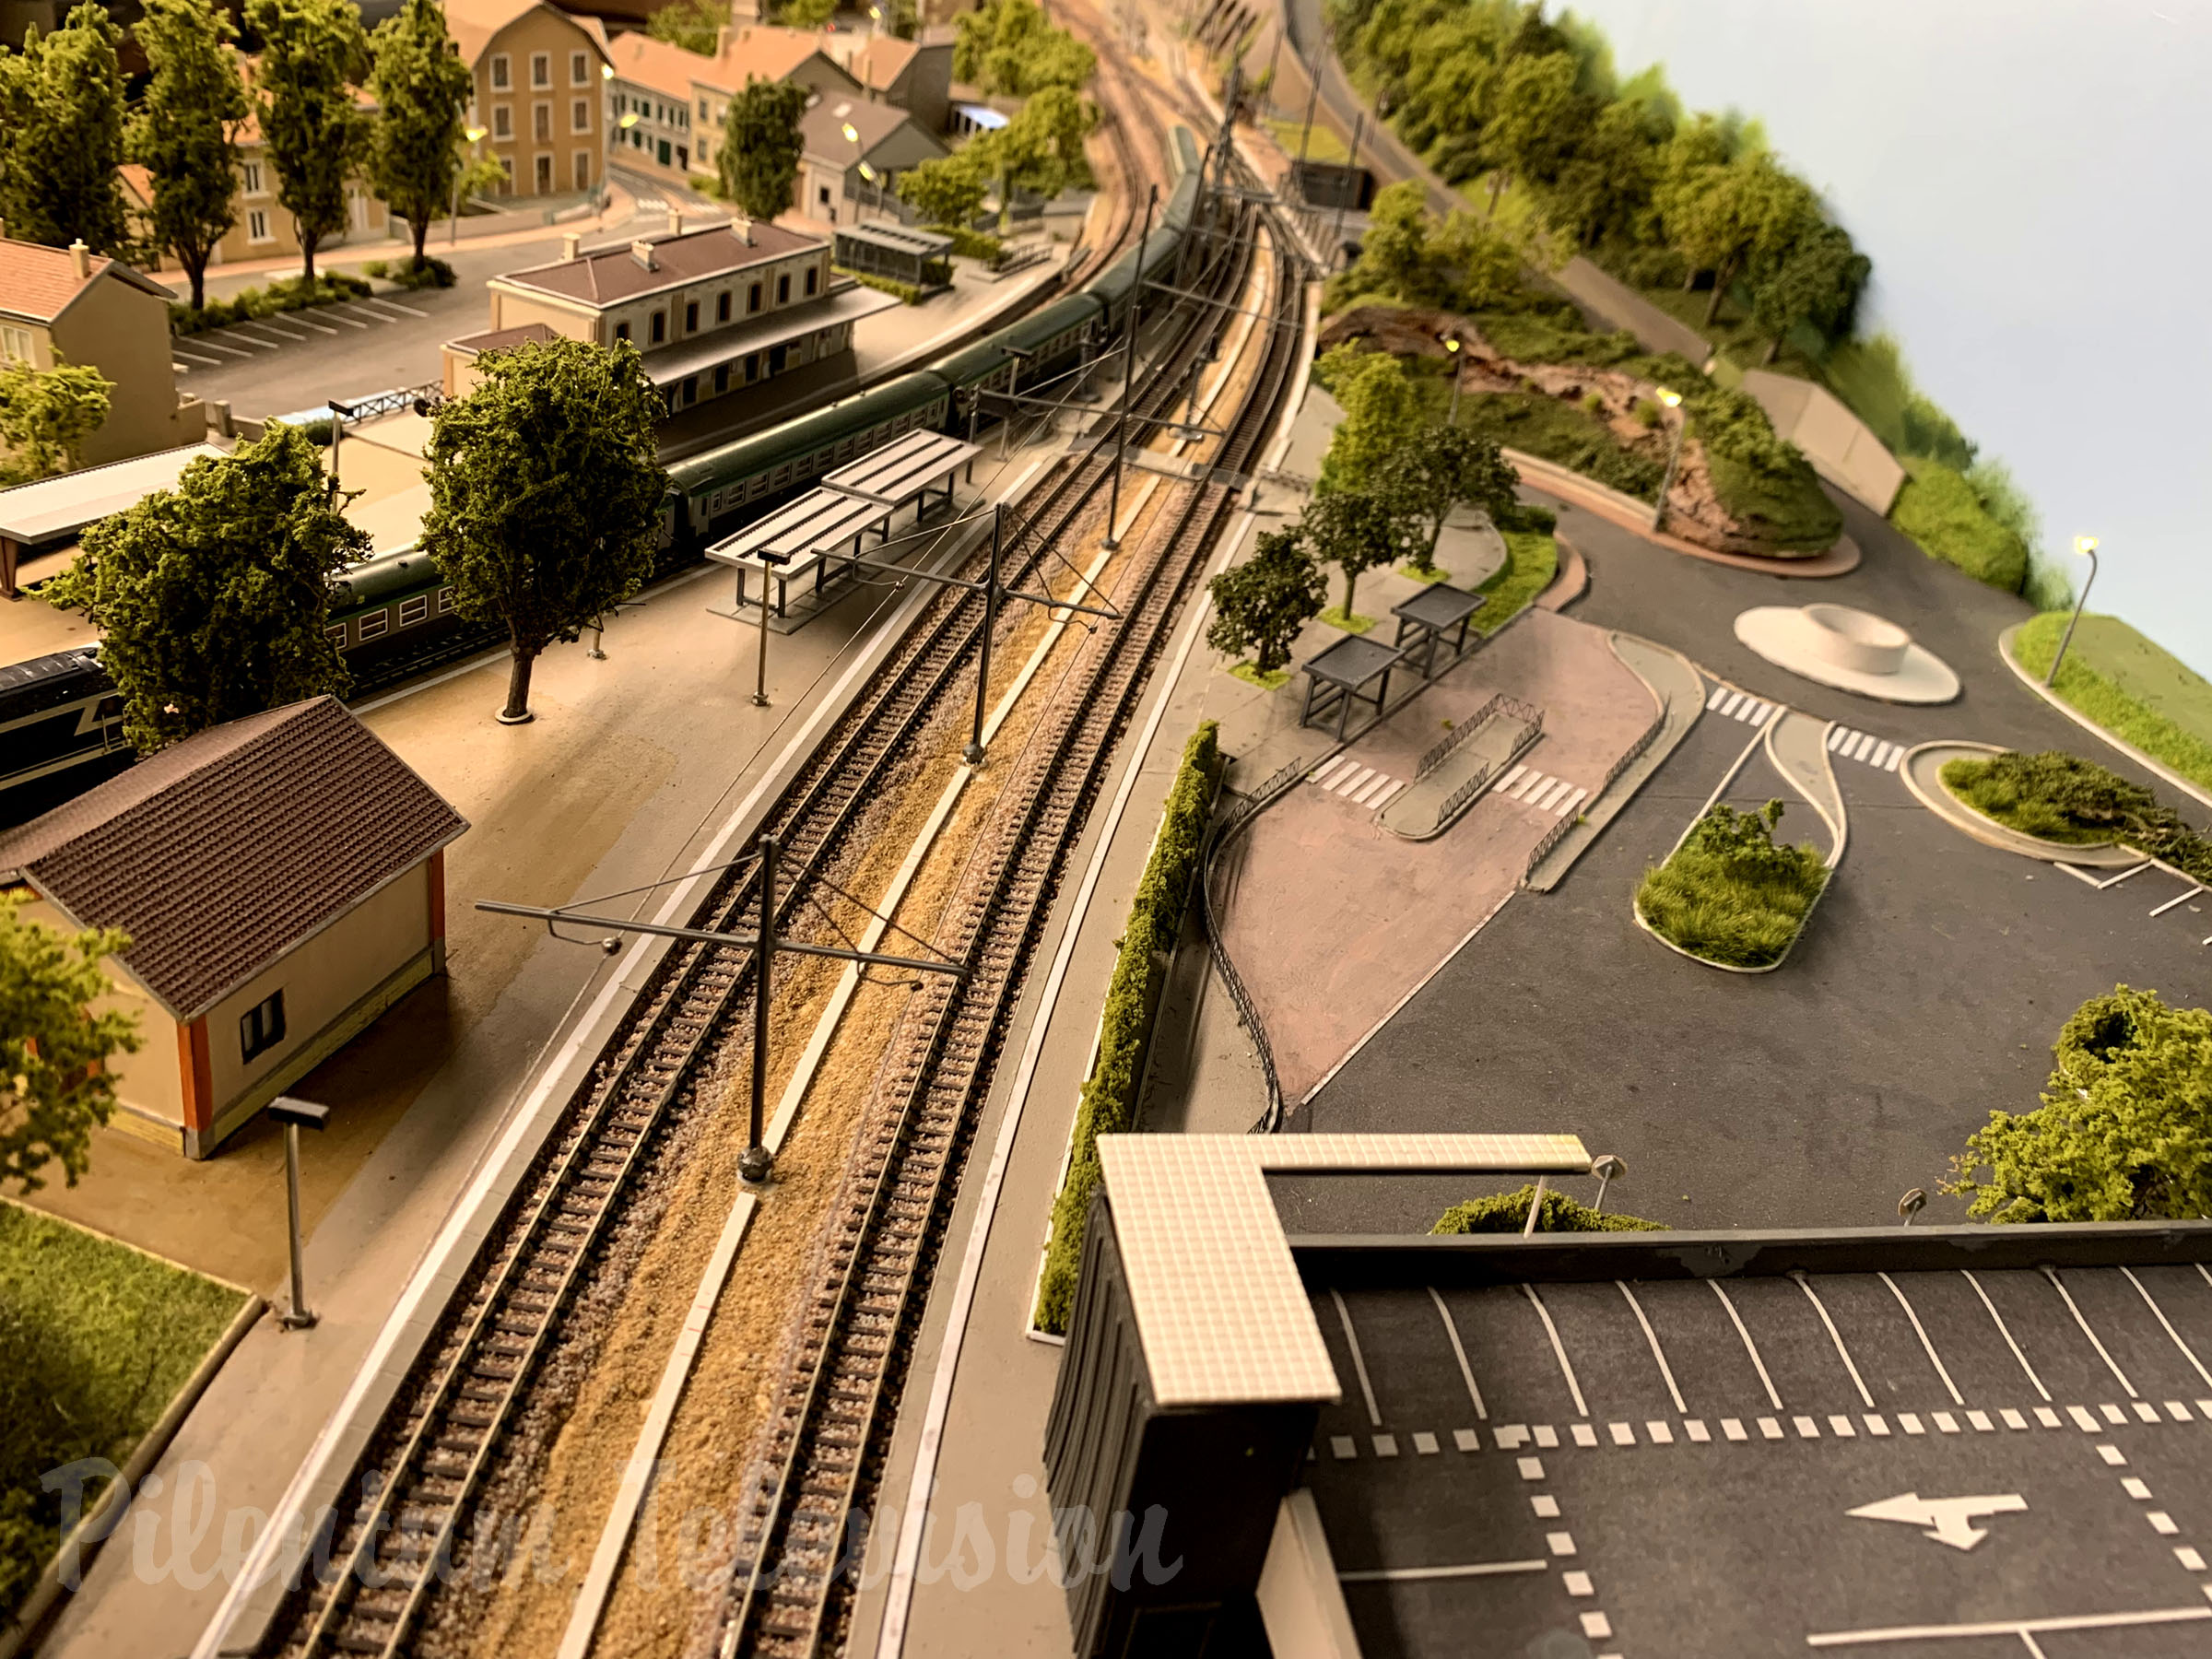 French N Scale Layout and SNCF Model Trains at the Prototype Railway Station of L’Arbresle